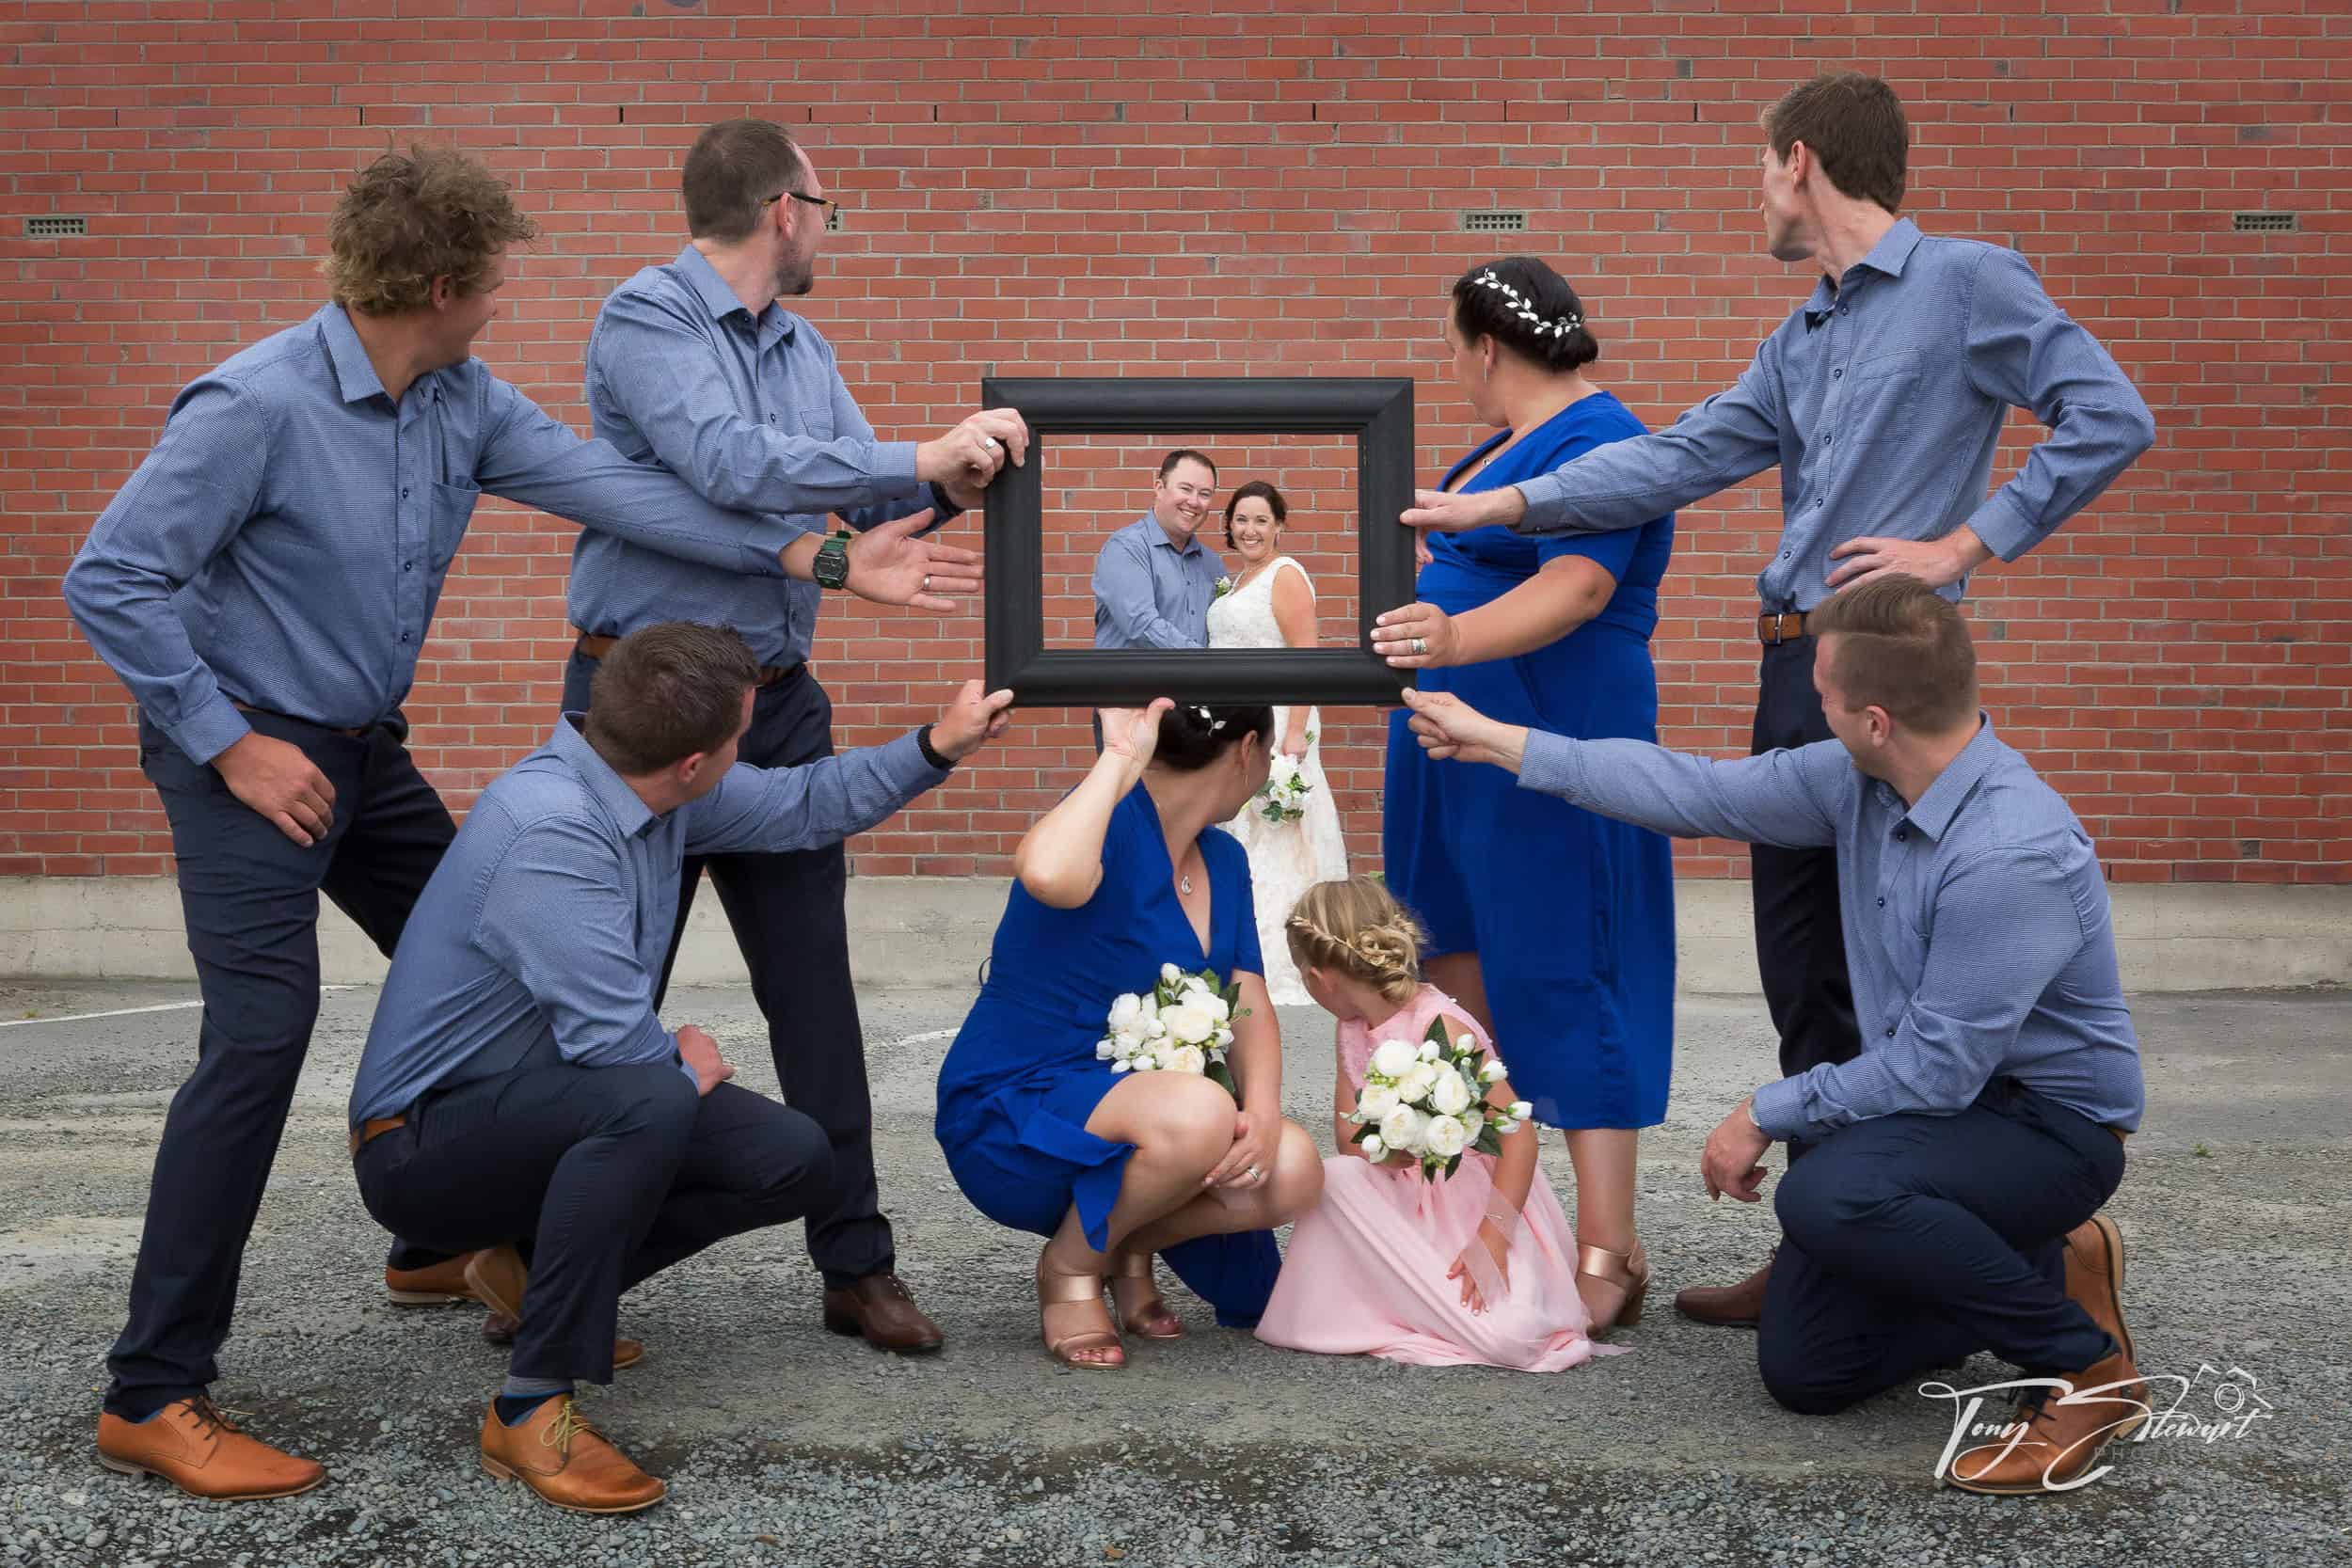 Couple pose through a photo frame held up by the rest of their bridal party, in Ashburton.